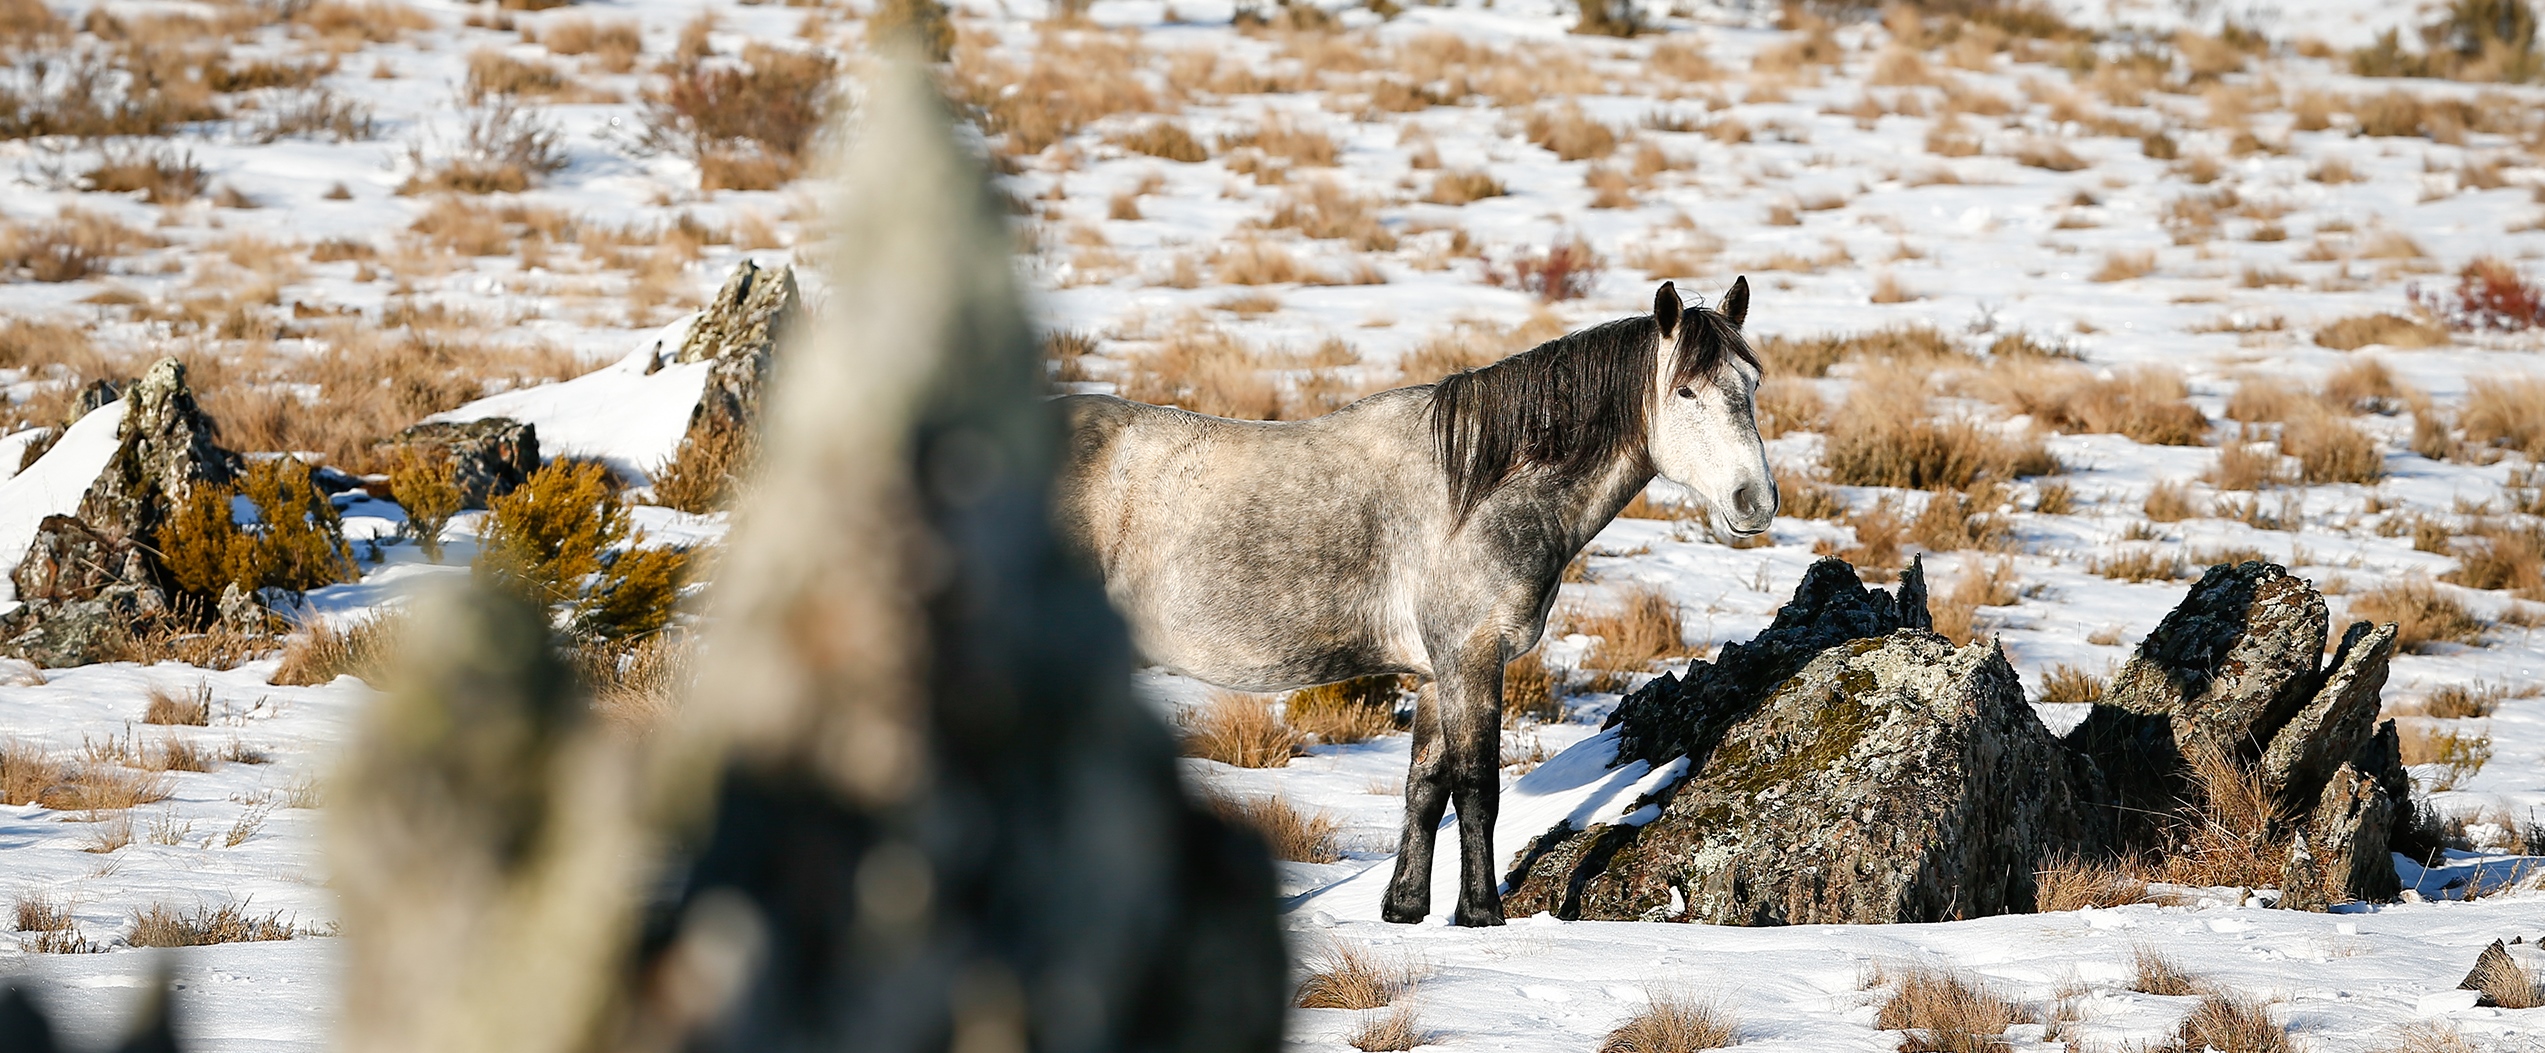 Greys among the Rocky Tors: Australian Snowy Brumbies, Wild Horse of the World